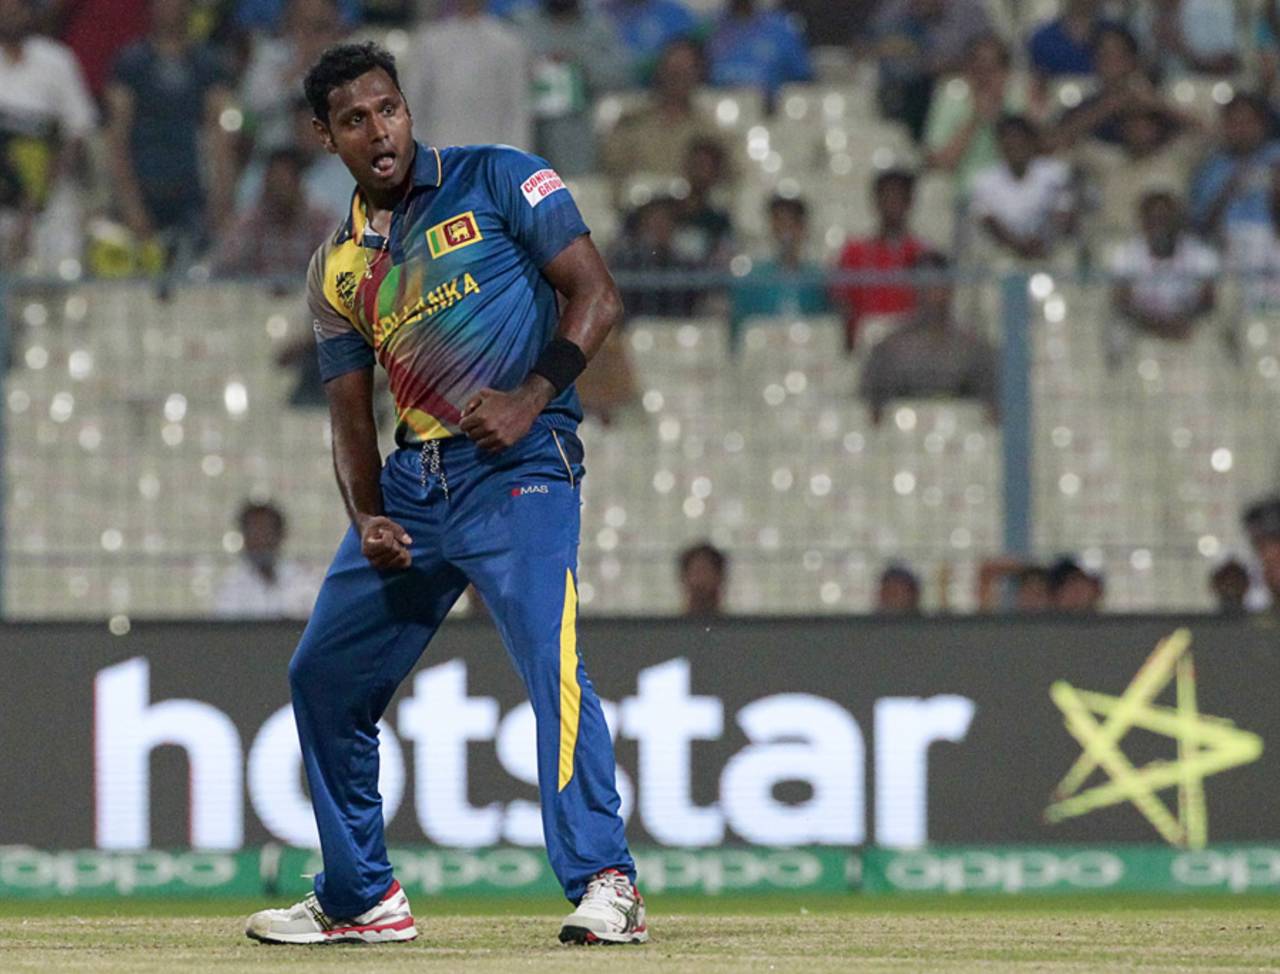 Sri Lanka's bowlers provided early breakthroughs after being asked to bowl, and had Afghanistan on the mat at 51 for 4&nbsp;&nbsp;&bull;&nbsp;&nbsp;International Cricket Council